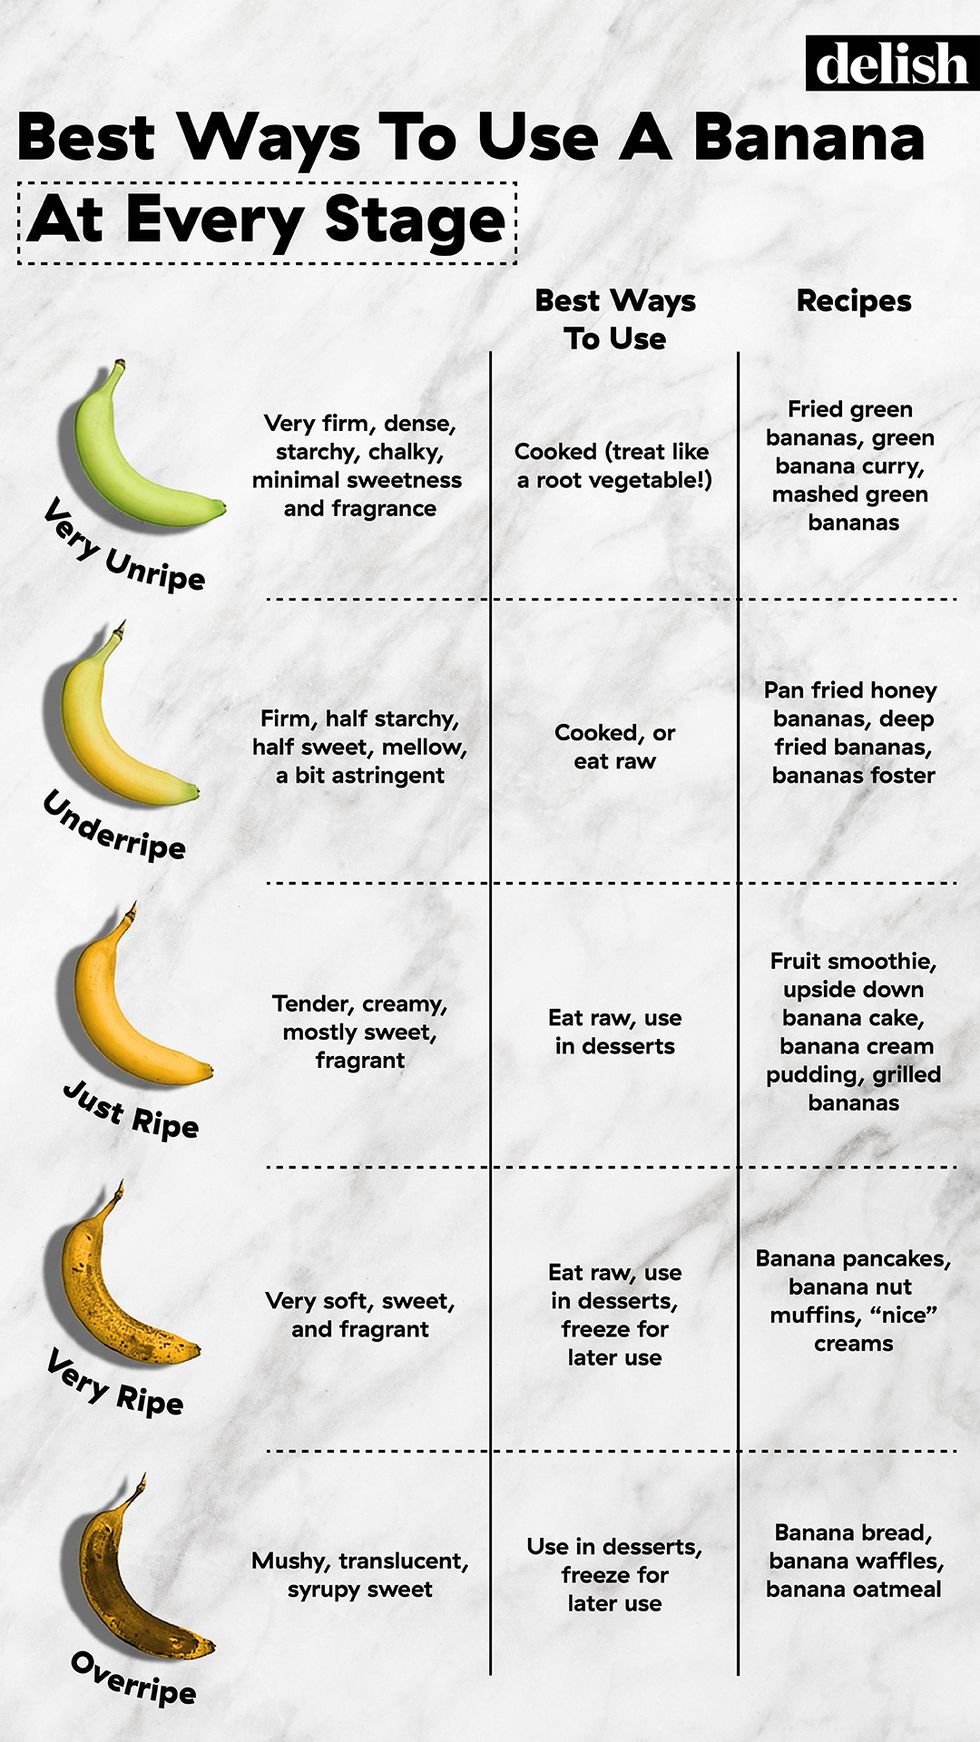 Use bananas at every stage